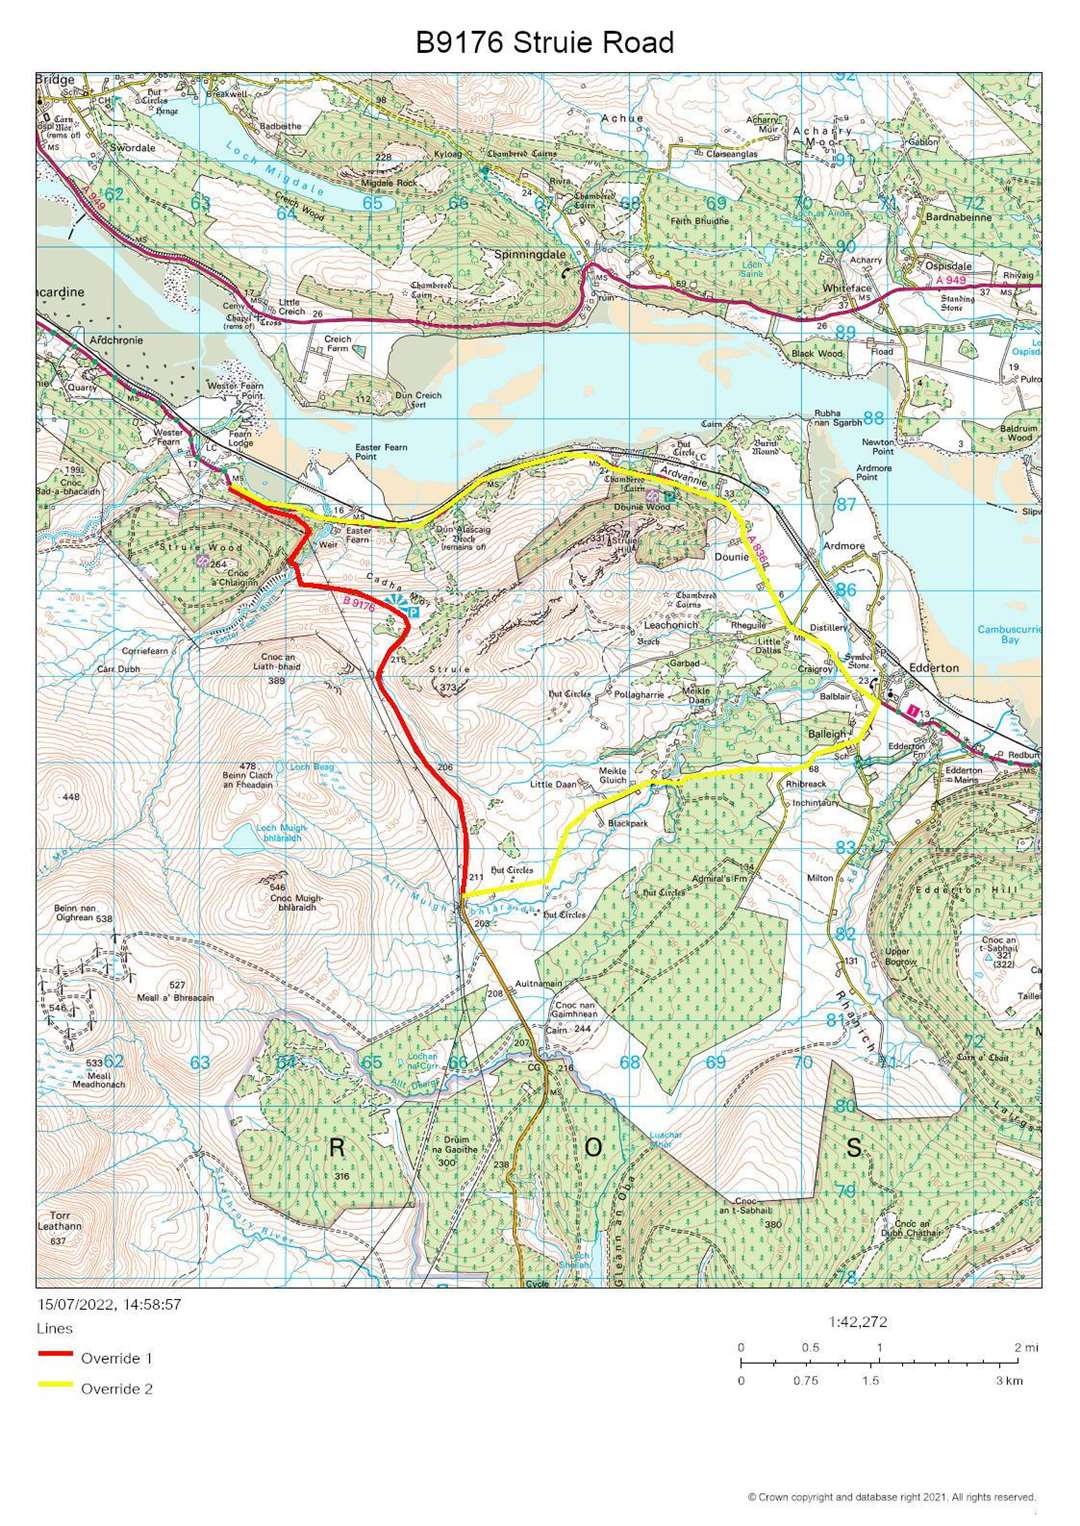 The Struie Road will be closed during the works.